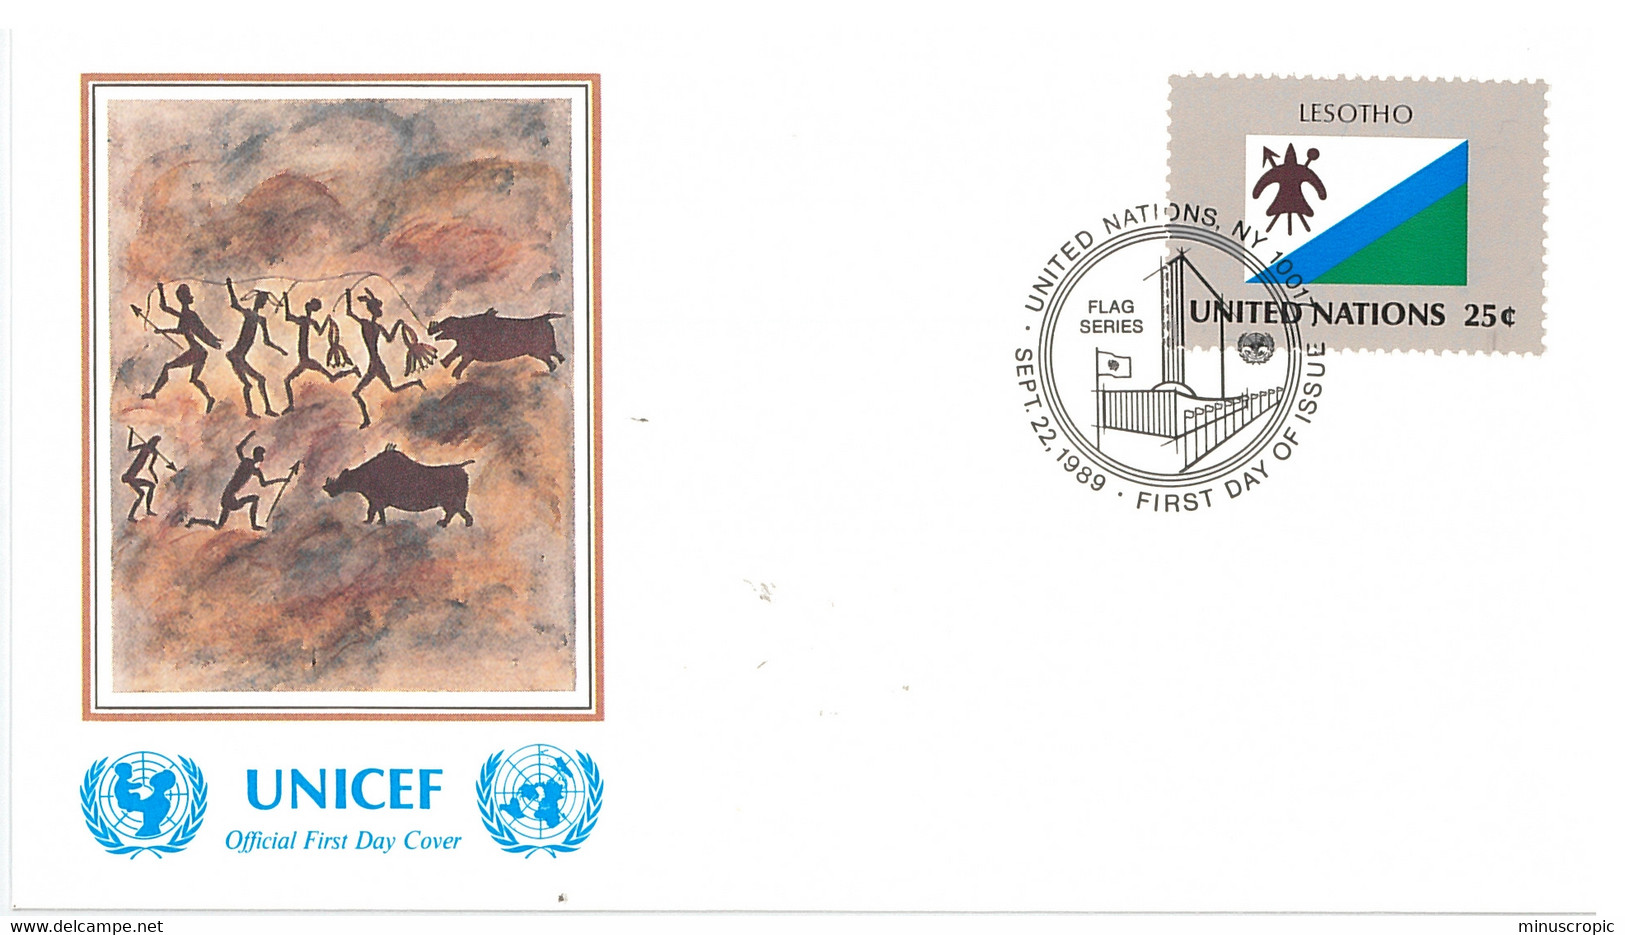 Enveloppe FDC United Nations - UNICEF - Flag Series 9/89 - Lesotho - 1989 - Covers & Documents